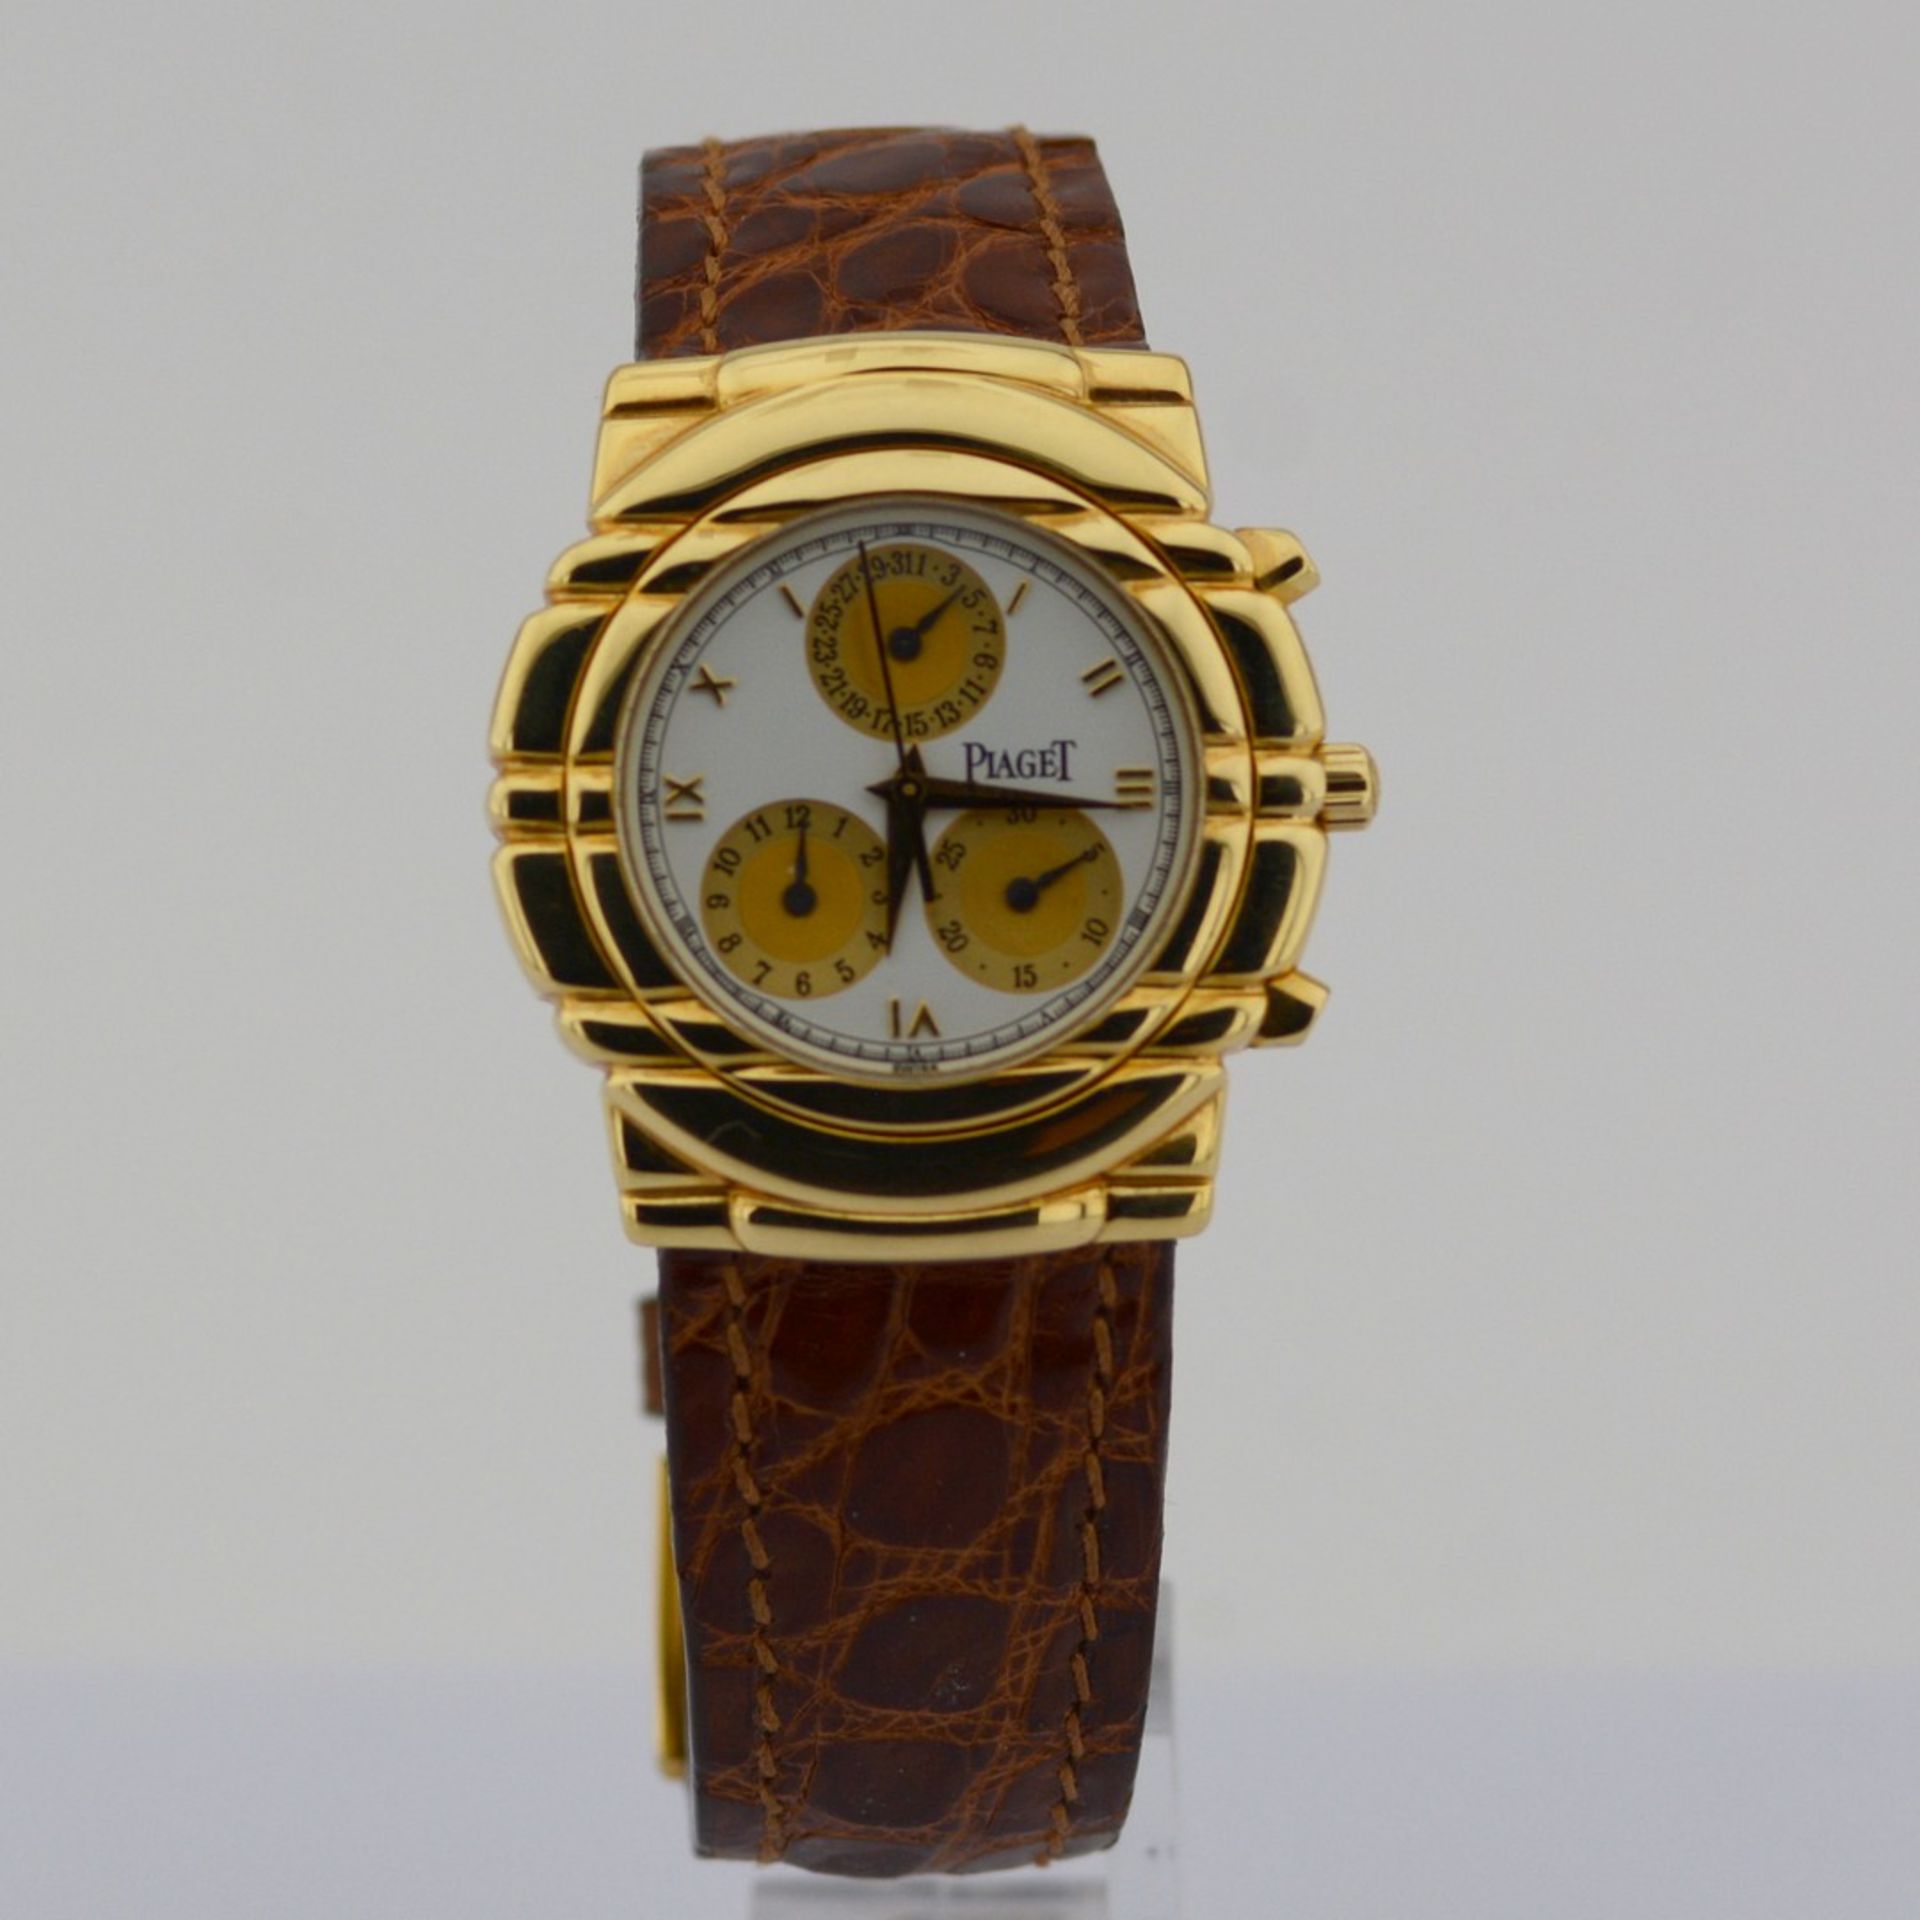 Piaget / Tanagra Chronograph - Lady's Yellow Gold Wristwatch - Image 8 of 15